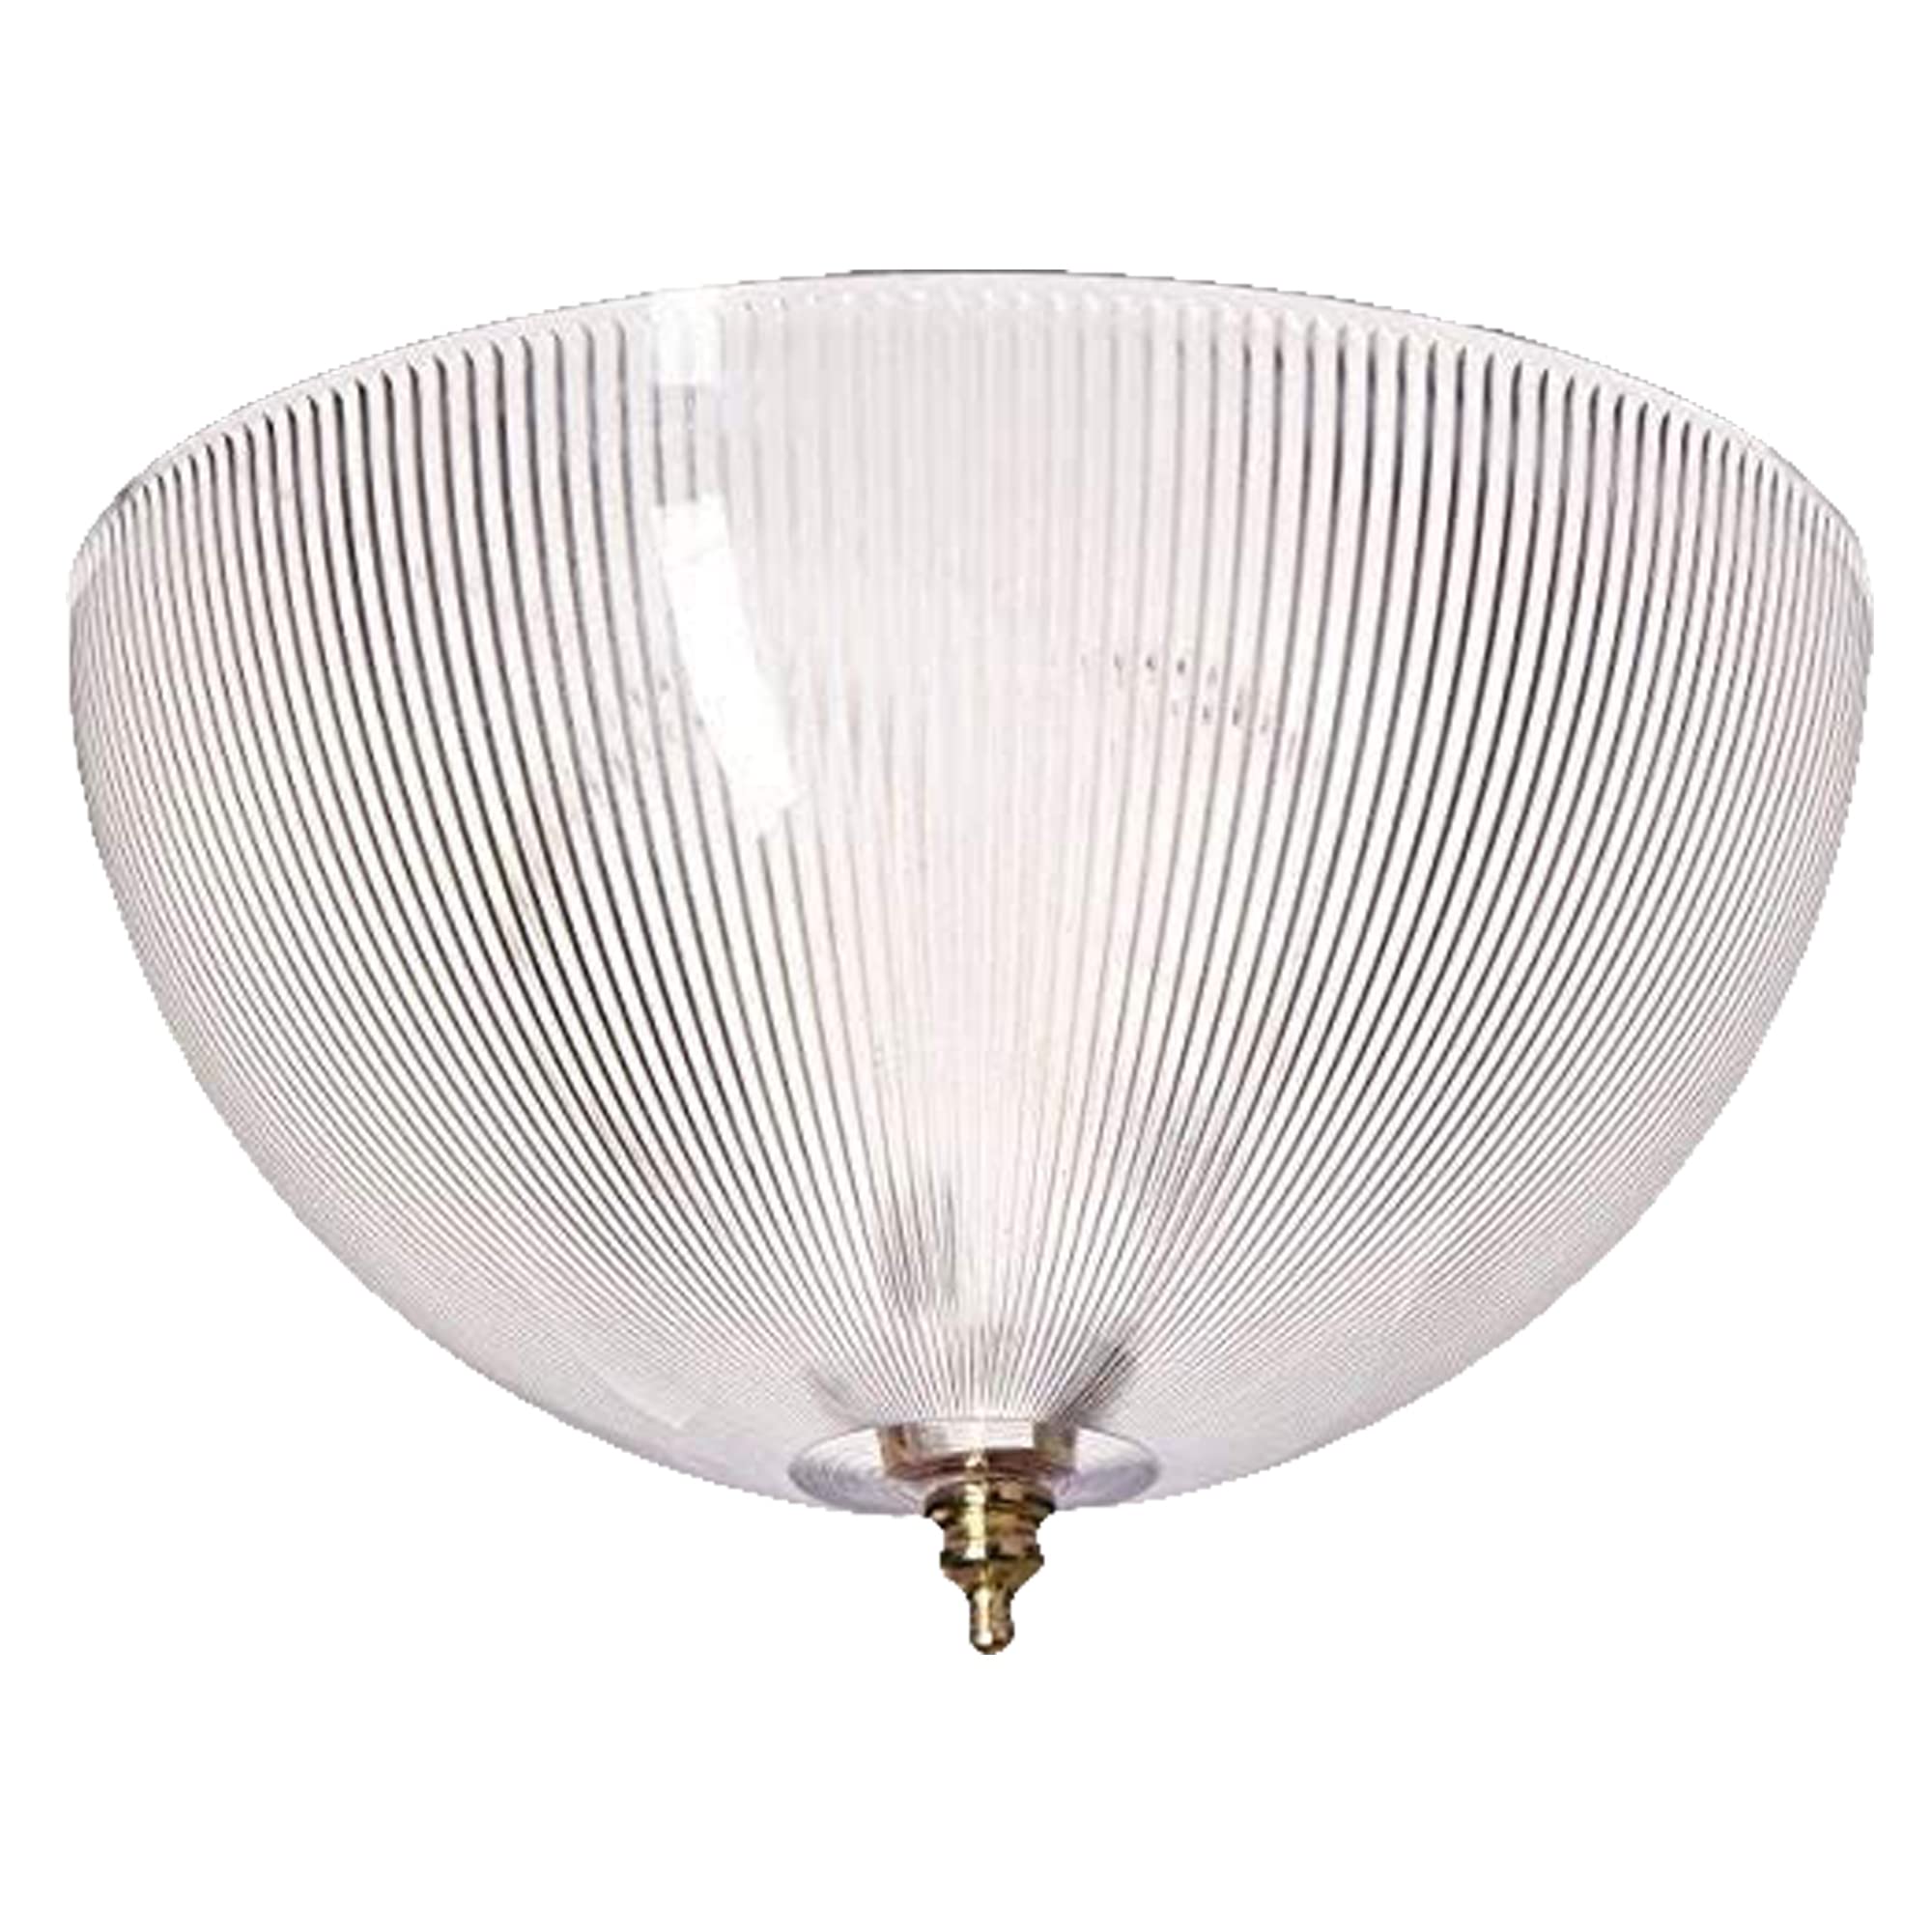 Ciata Lighting 4-3/4 Inch Ceiling Light Cover Fixture Dome Clip-On Shade For A-Shape Bulb  - Like New